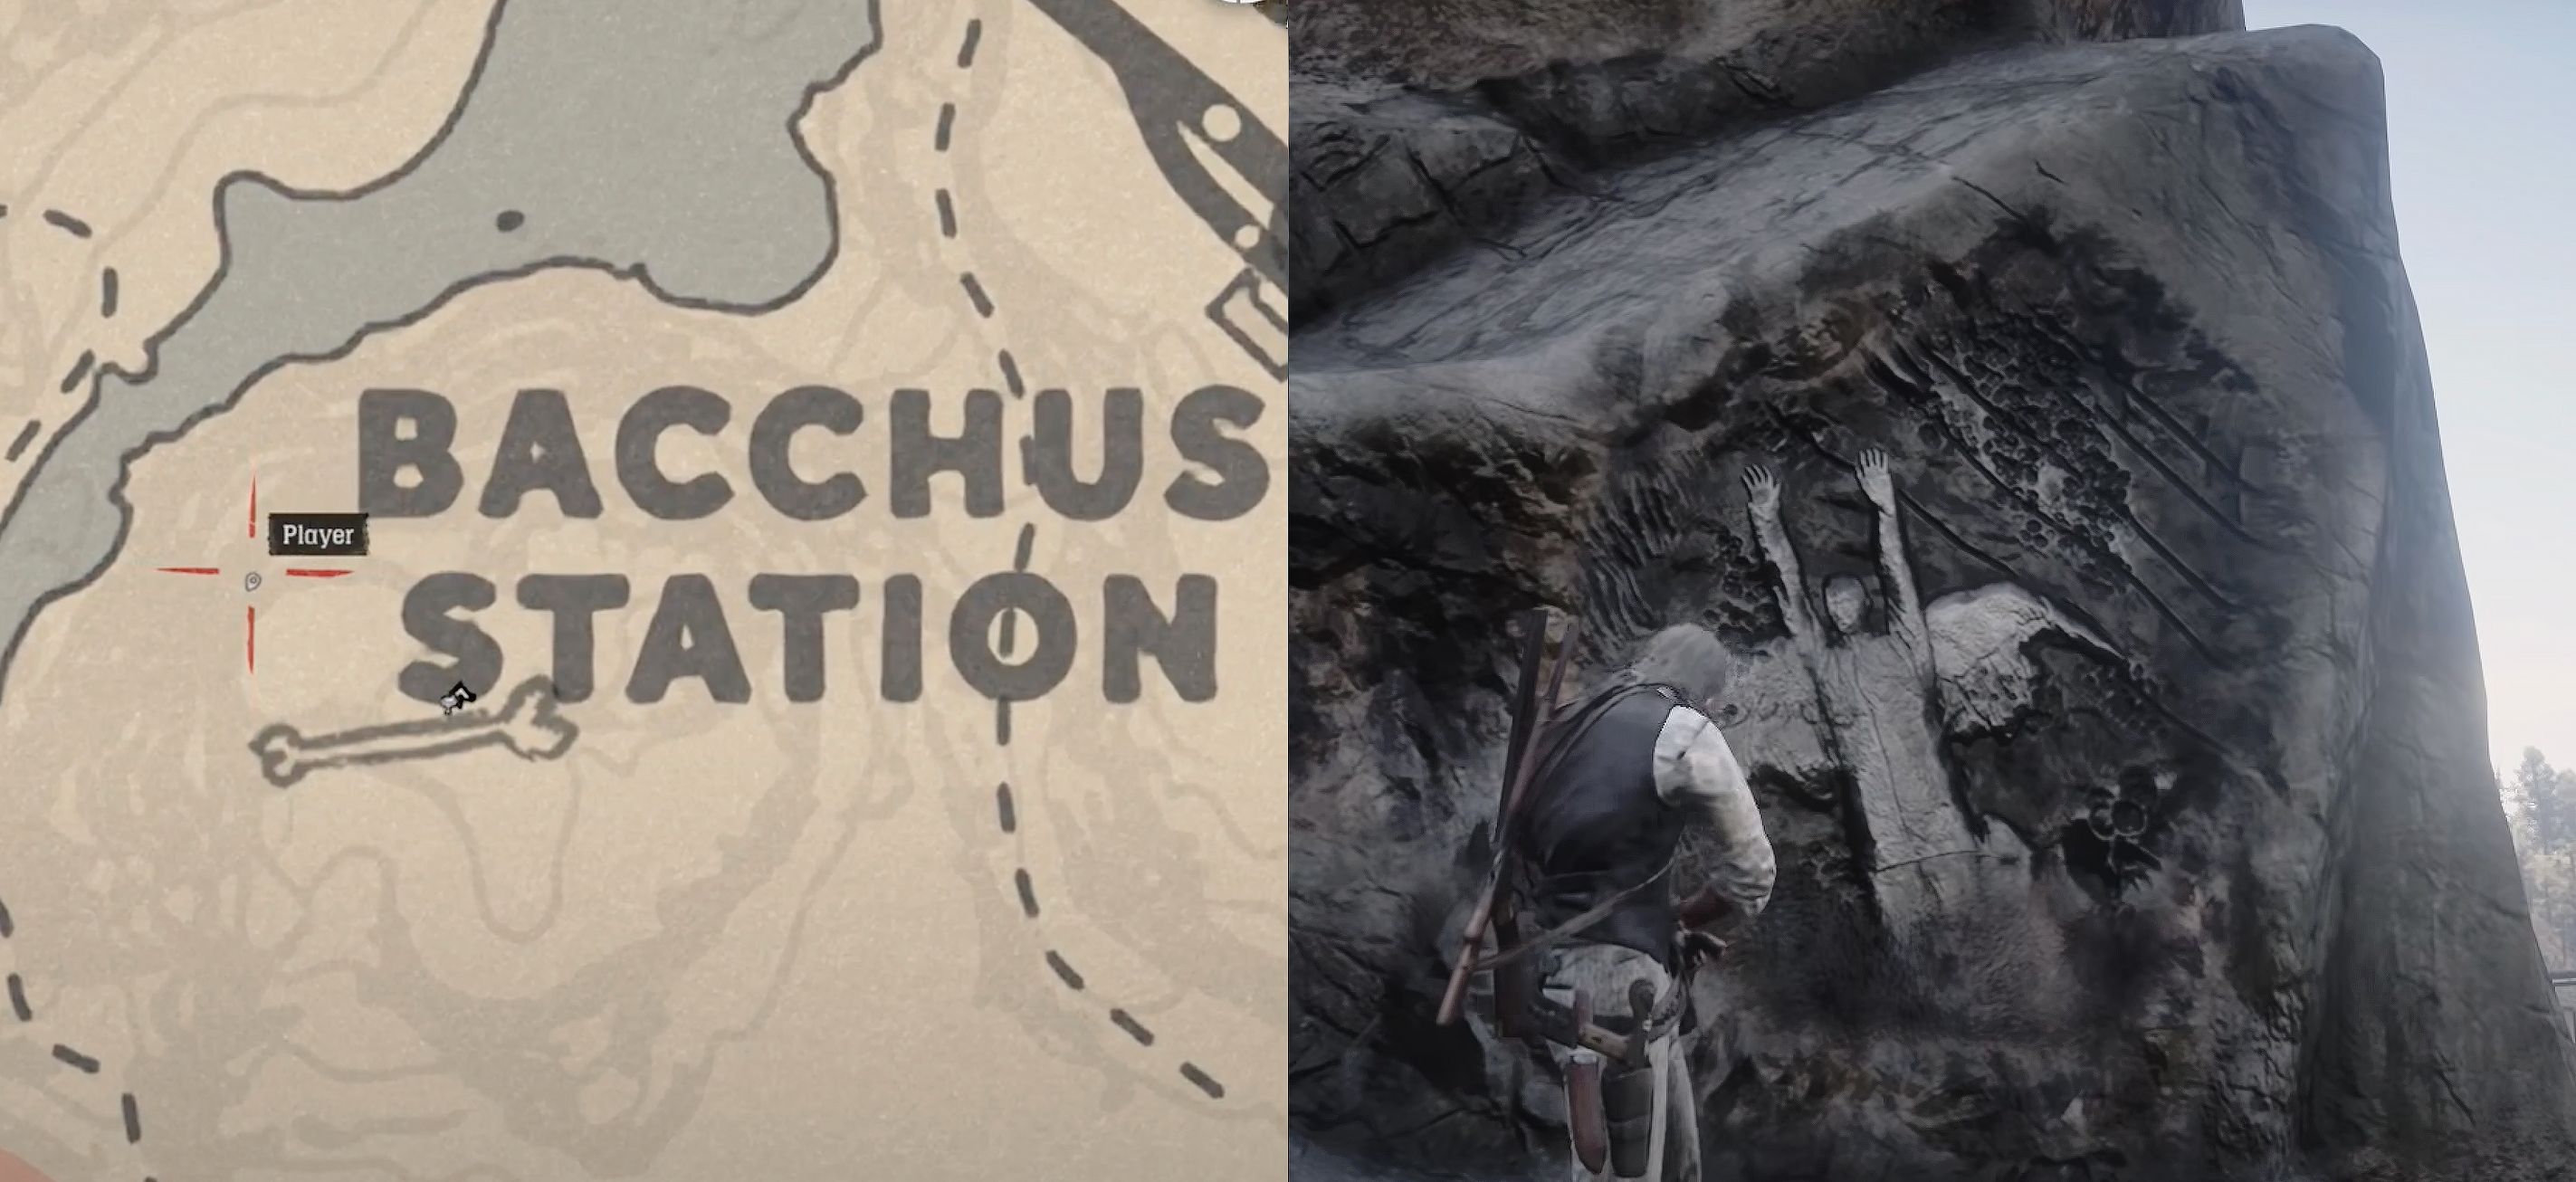 Bacchus Station Map And Rock Carving